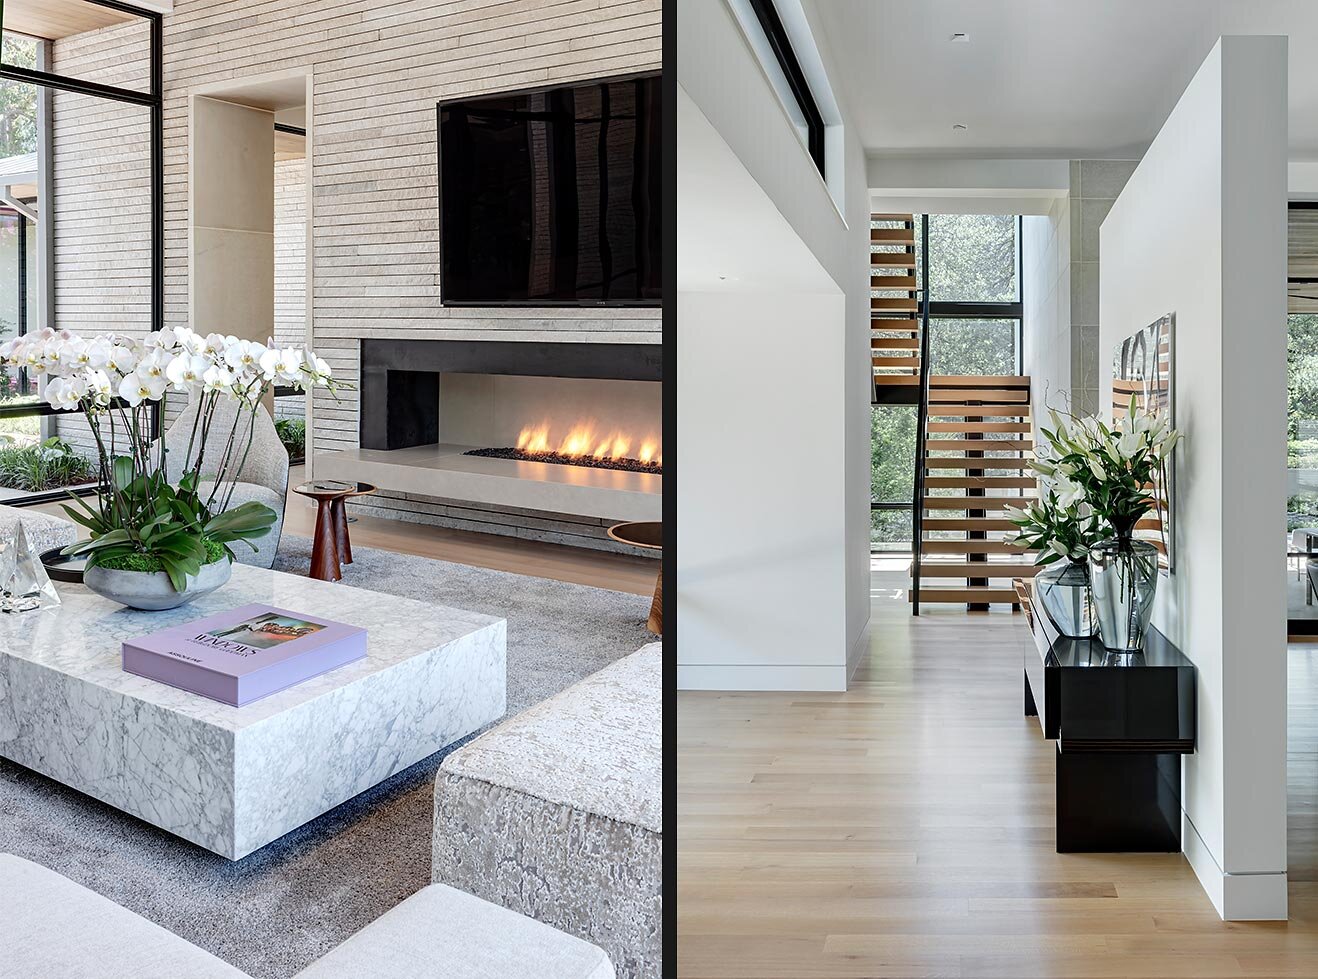  Modern comfortable contemporary home in Preston Hollow Dallas Texas featuring fireplace and stairwell at corner of home creating a sculptural element of steel, wood and glass 